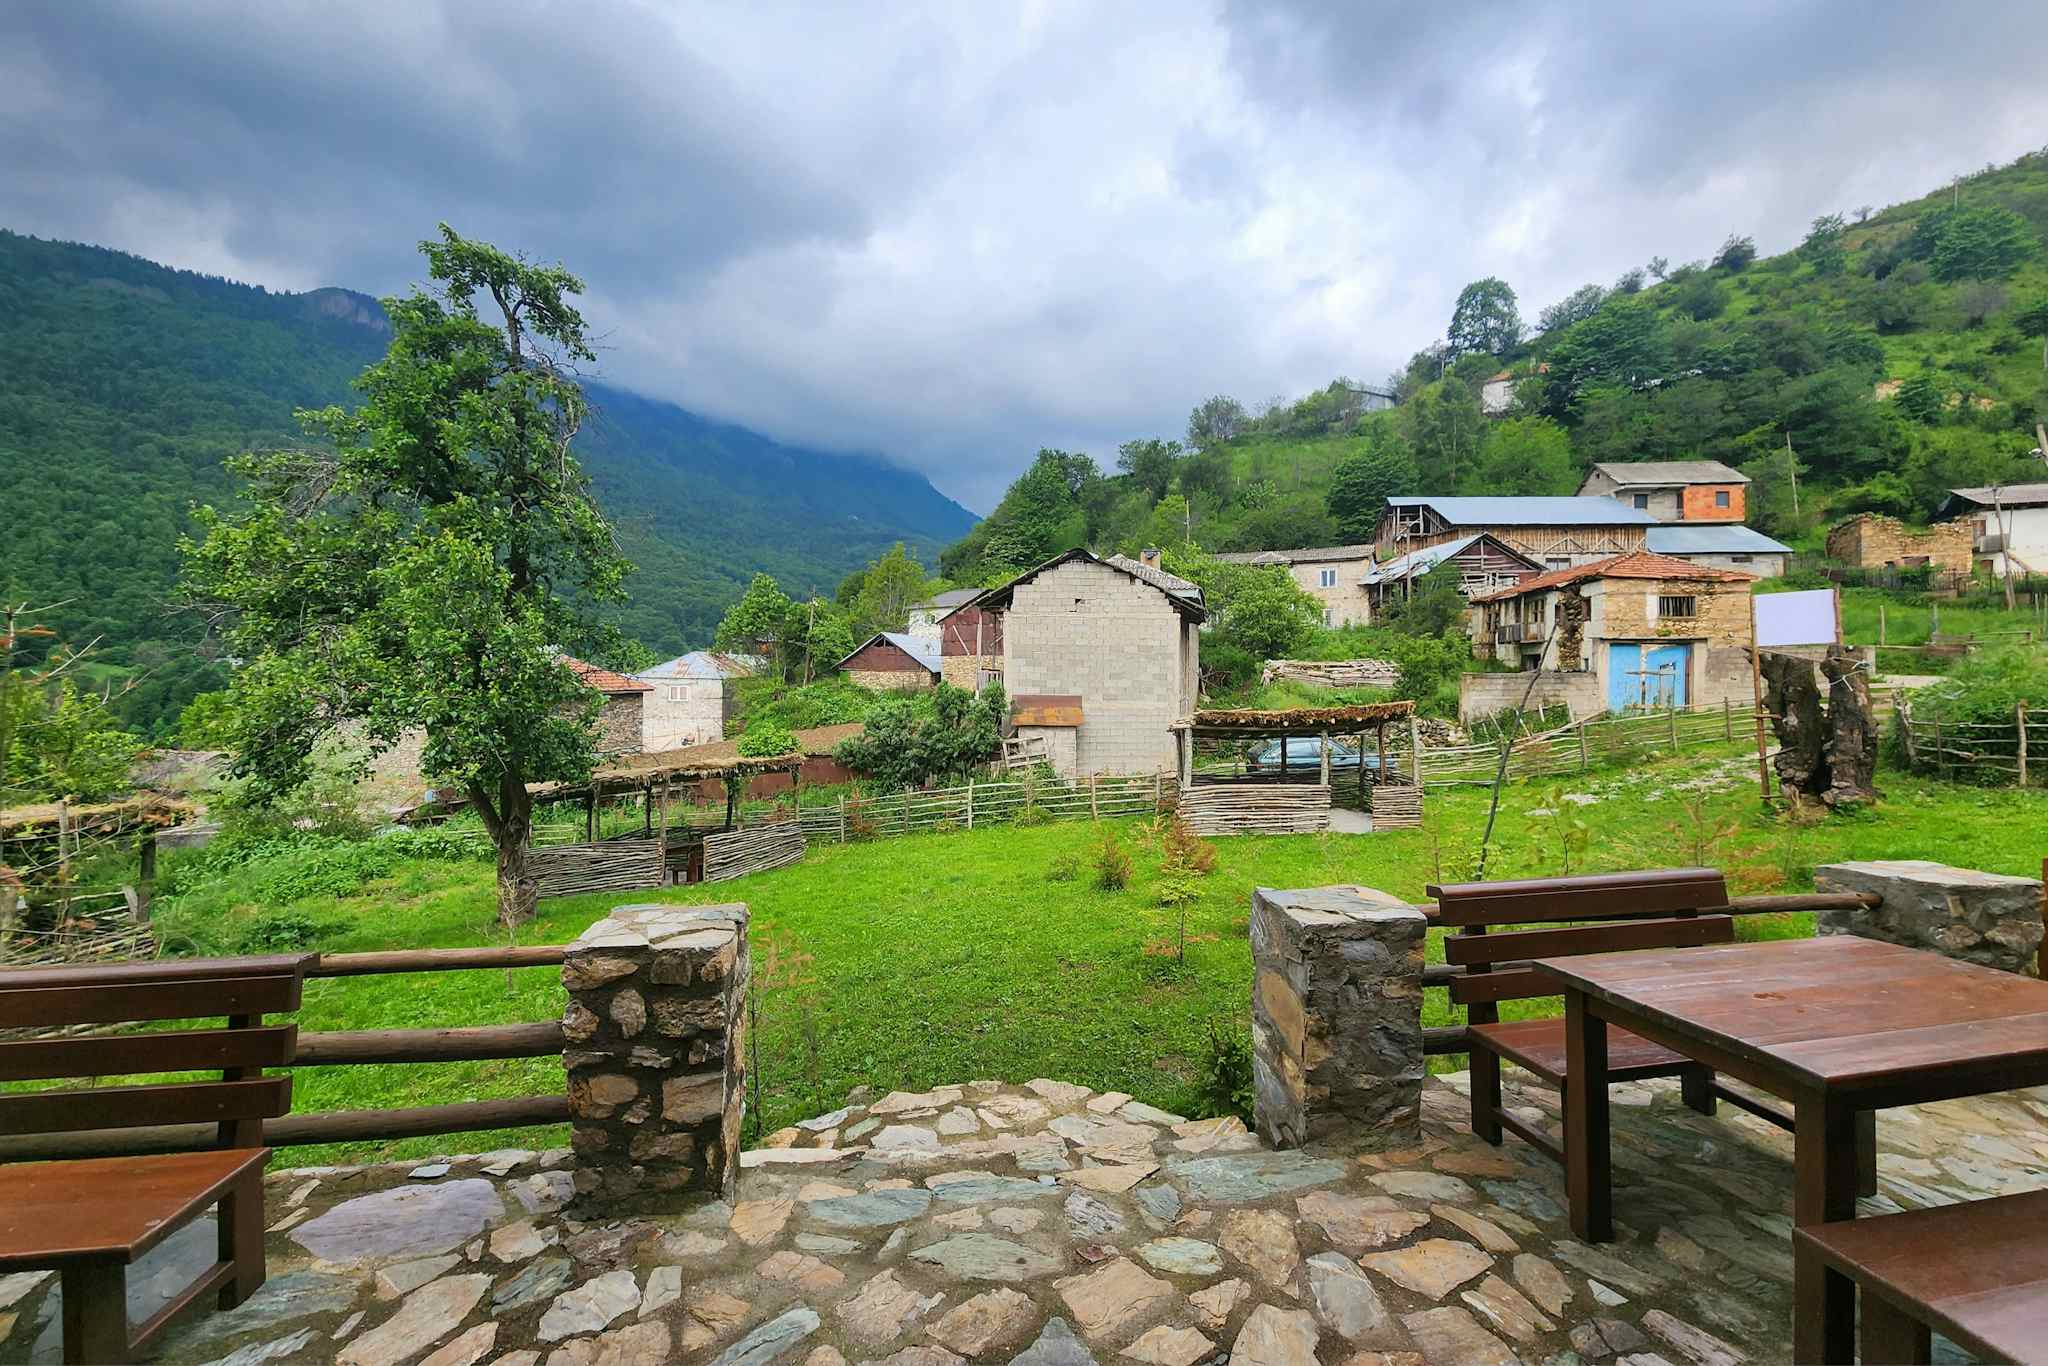 Bozovce Village, Sharr Mountains, Kosovo. Photo Host Butterfly Outdoor Adventure